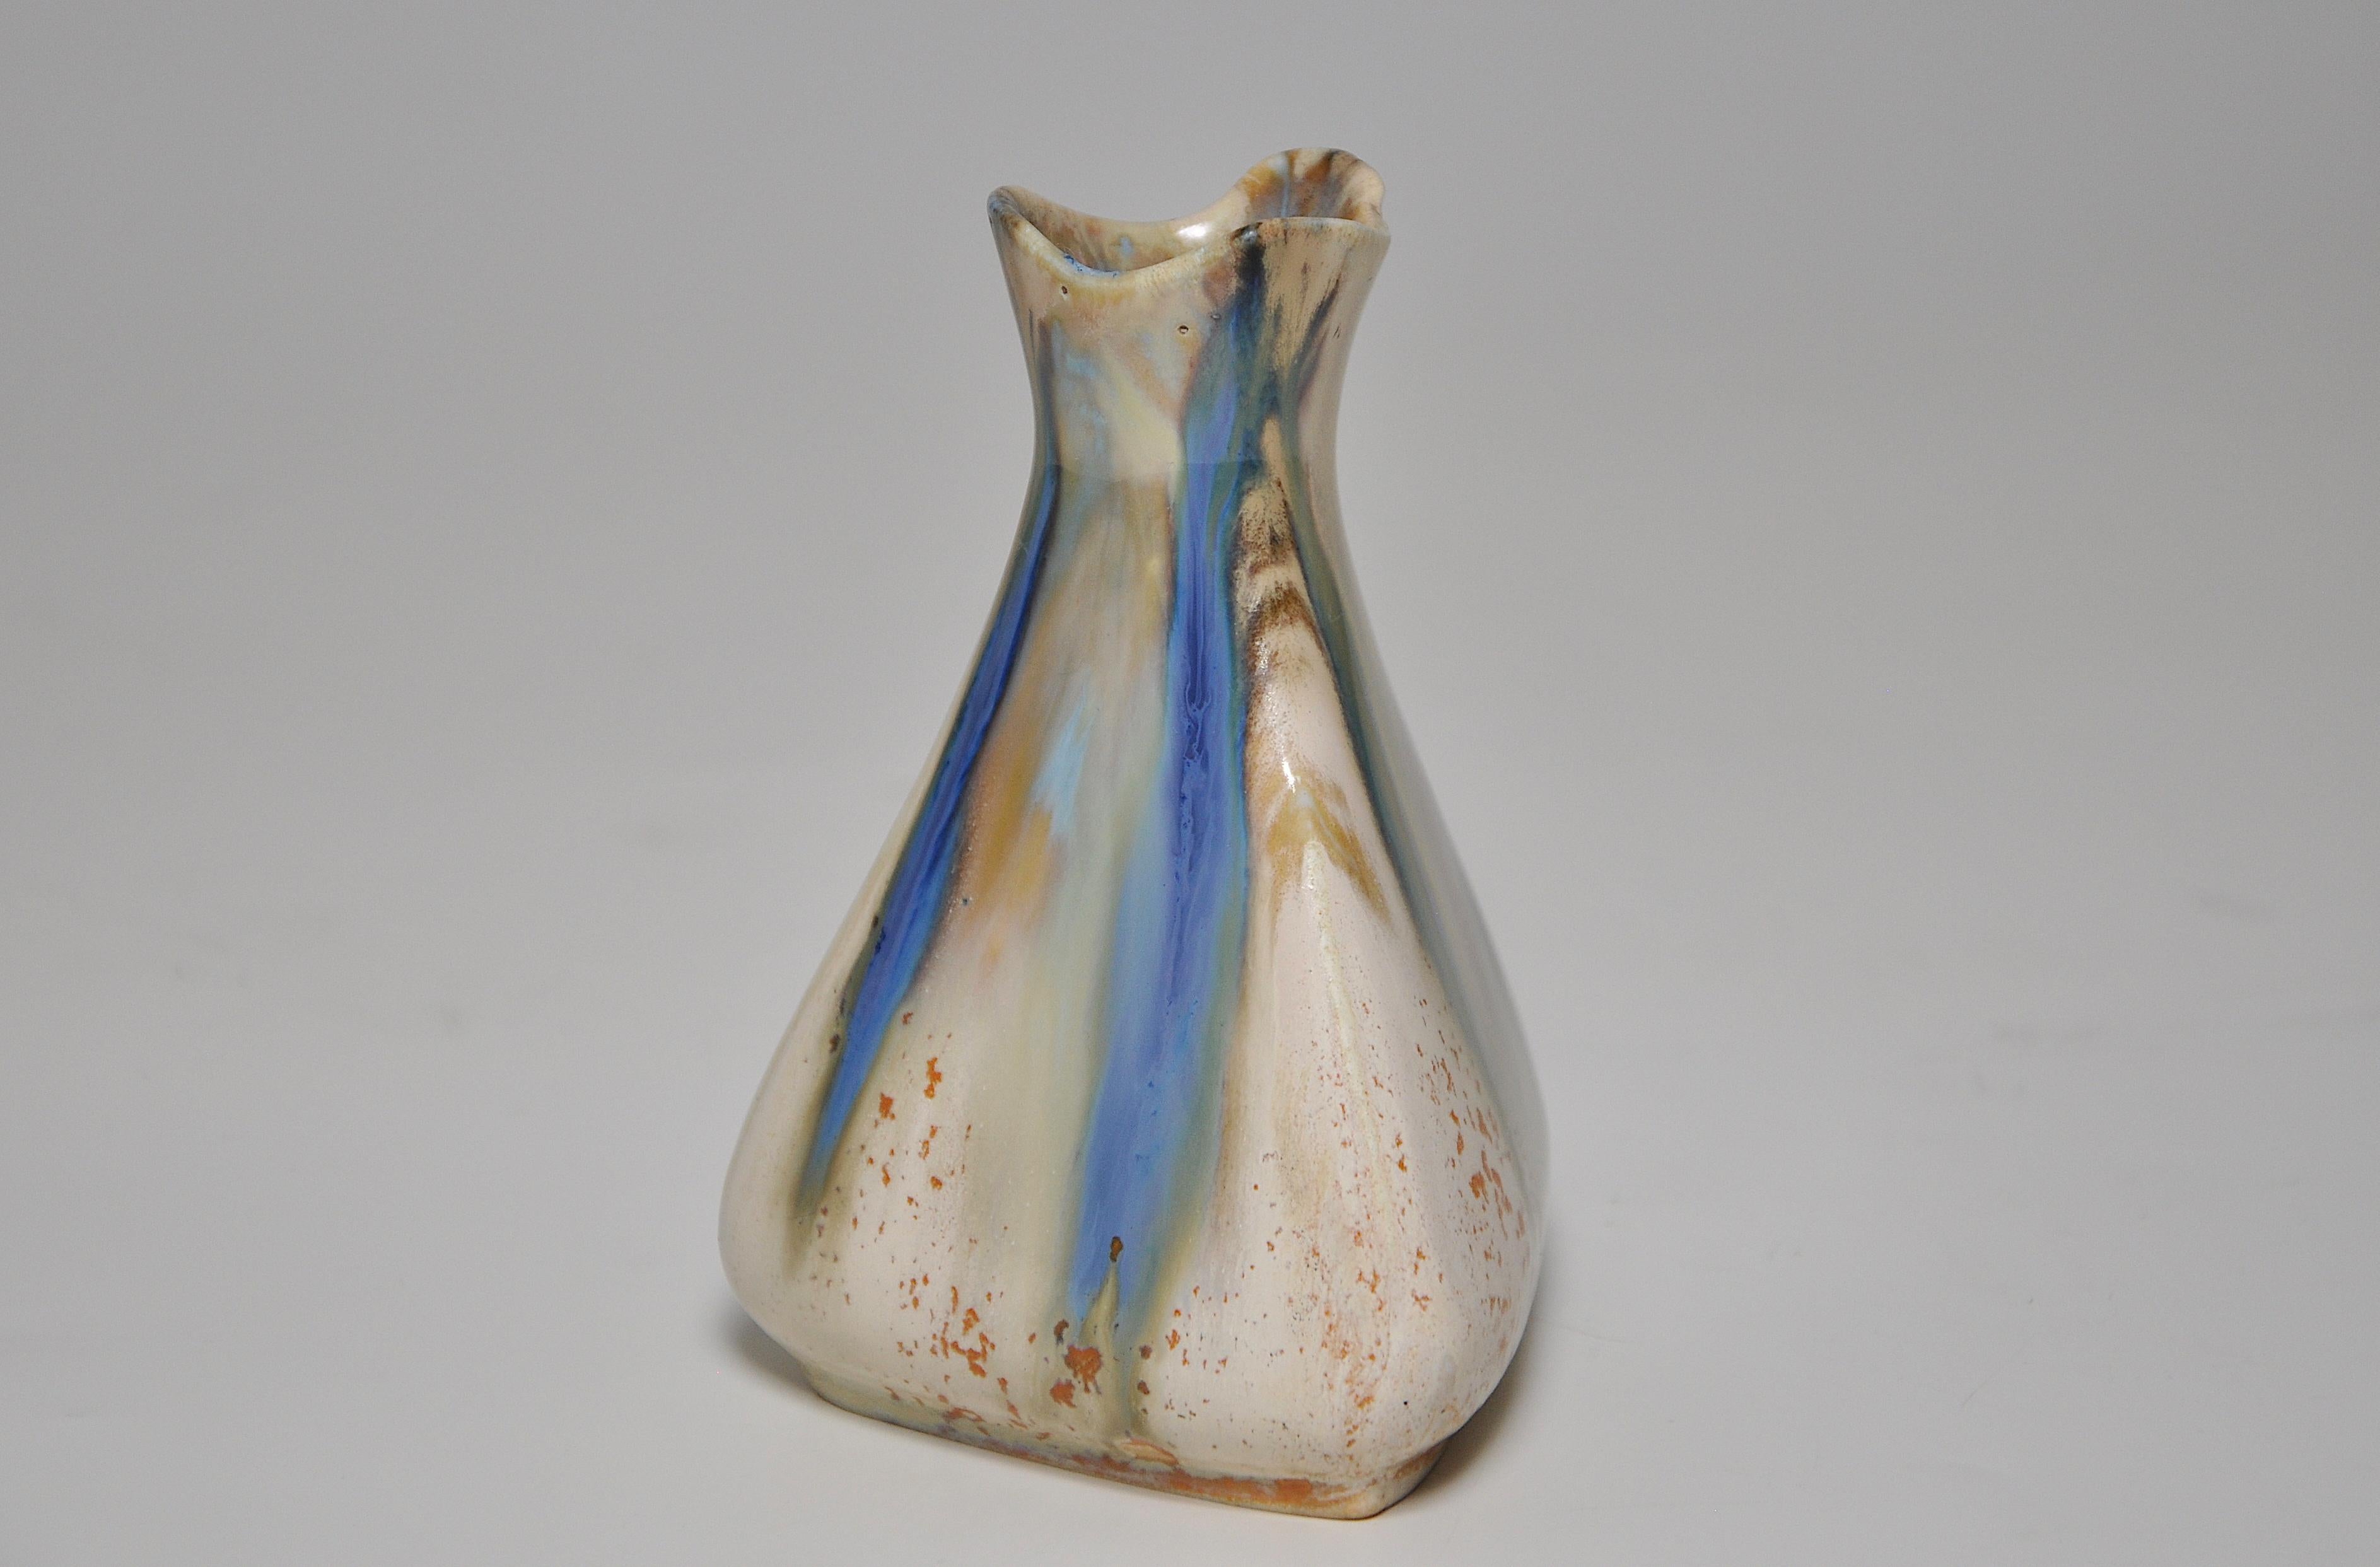 A perfect example of a small stoneware vase of Japoniste inspiration, triangular in form with an flared top, and covered with a flowing cream, green, and blue flame glaze, flecked with brown. By the French art ceramist Jean Longlade (1879-1928) of